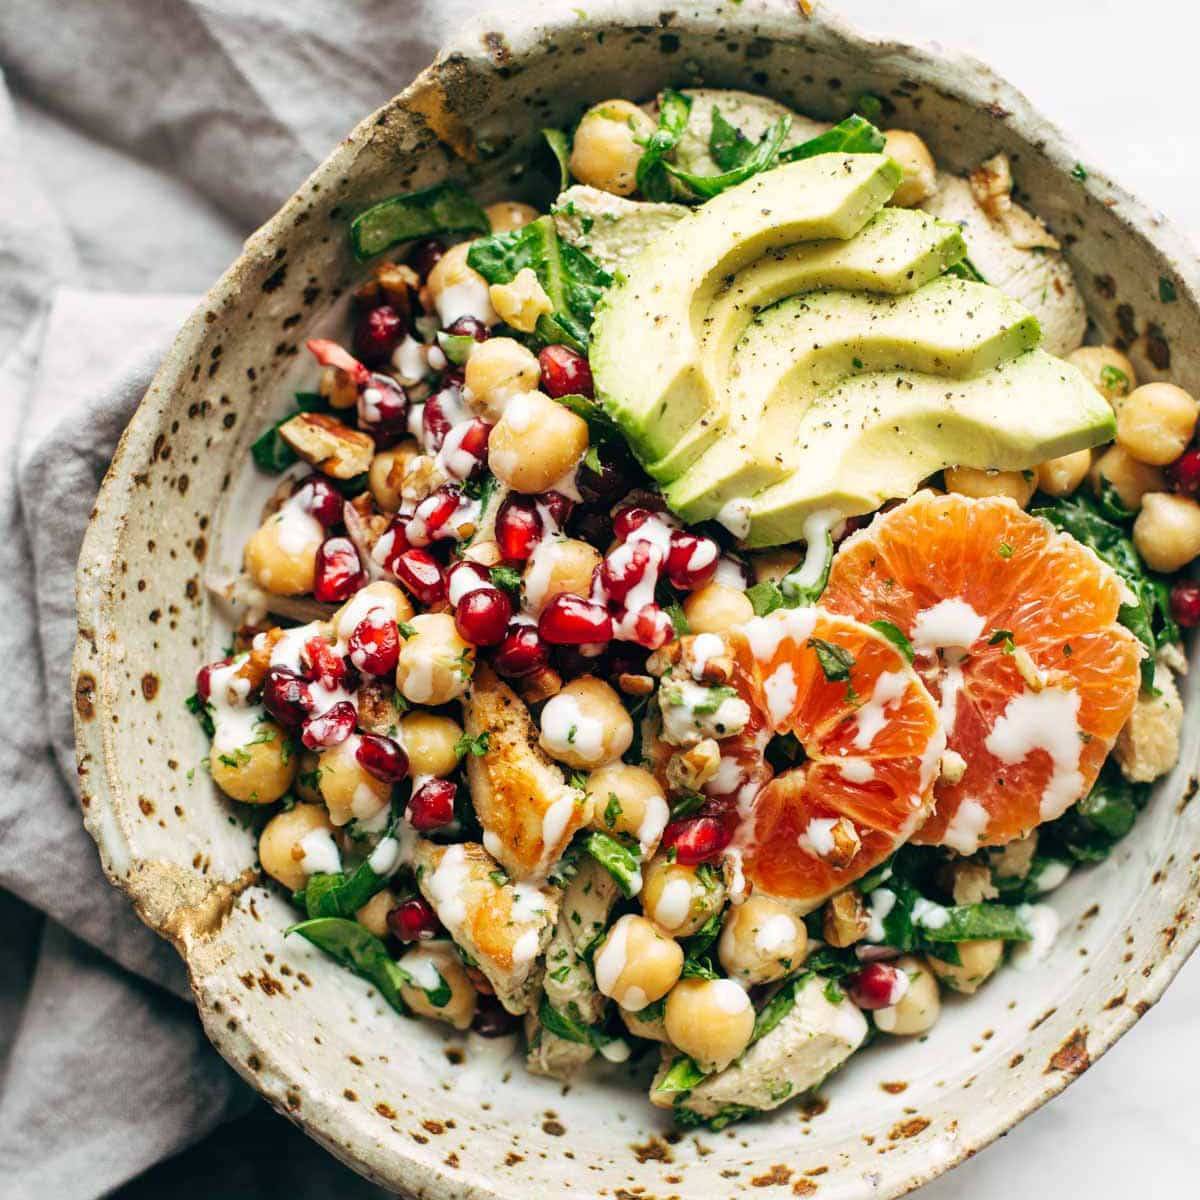 Winter Spa salad in a bowl with chickpeas, avocado, and oranges.